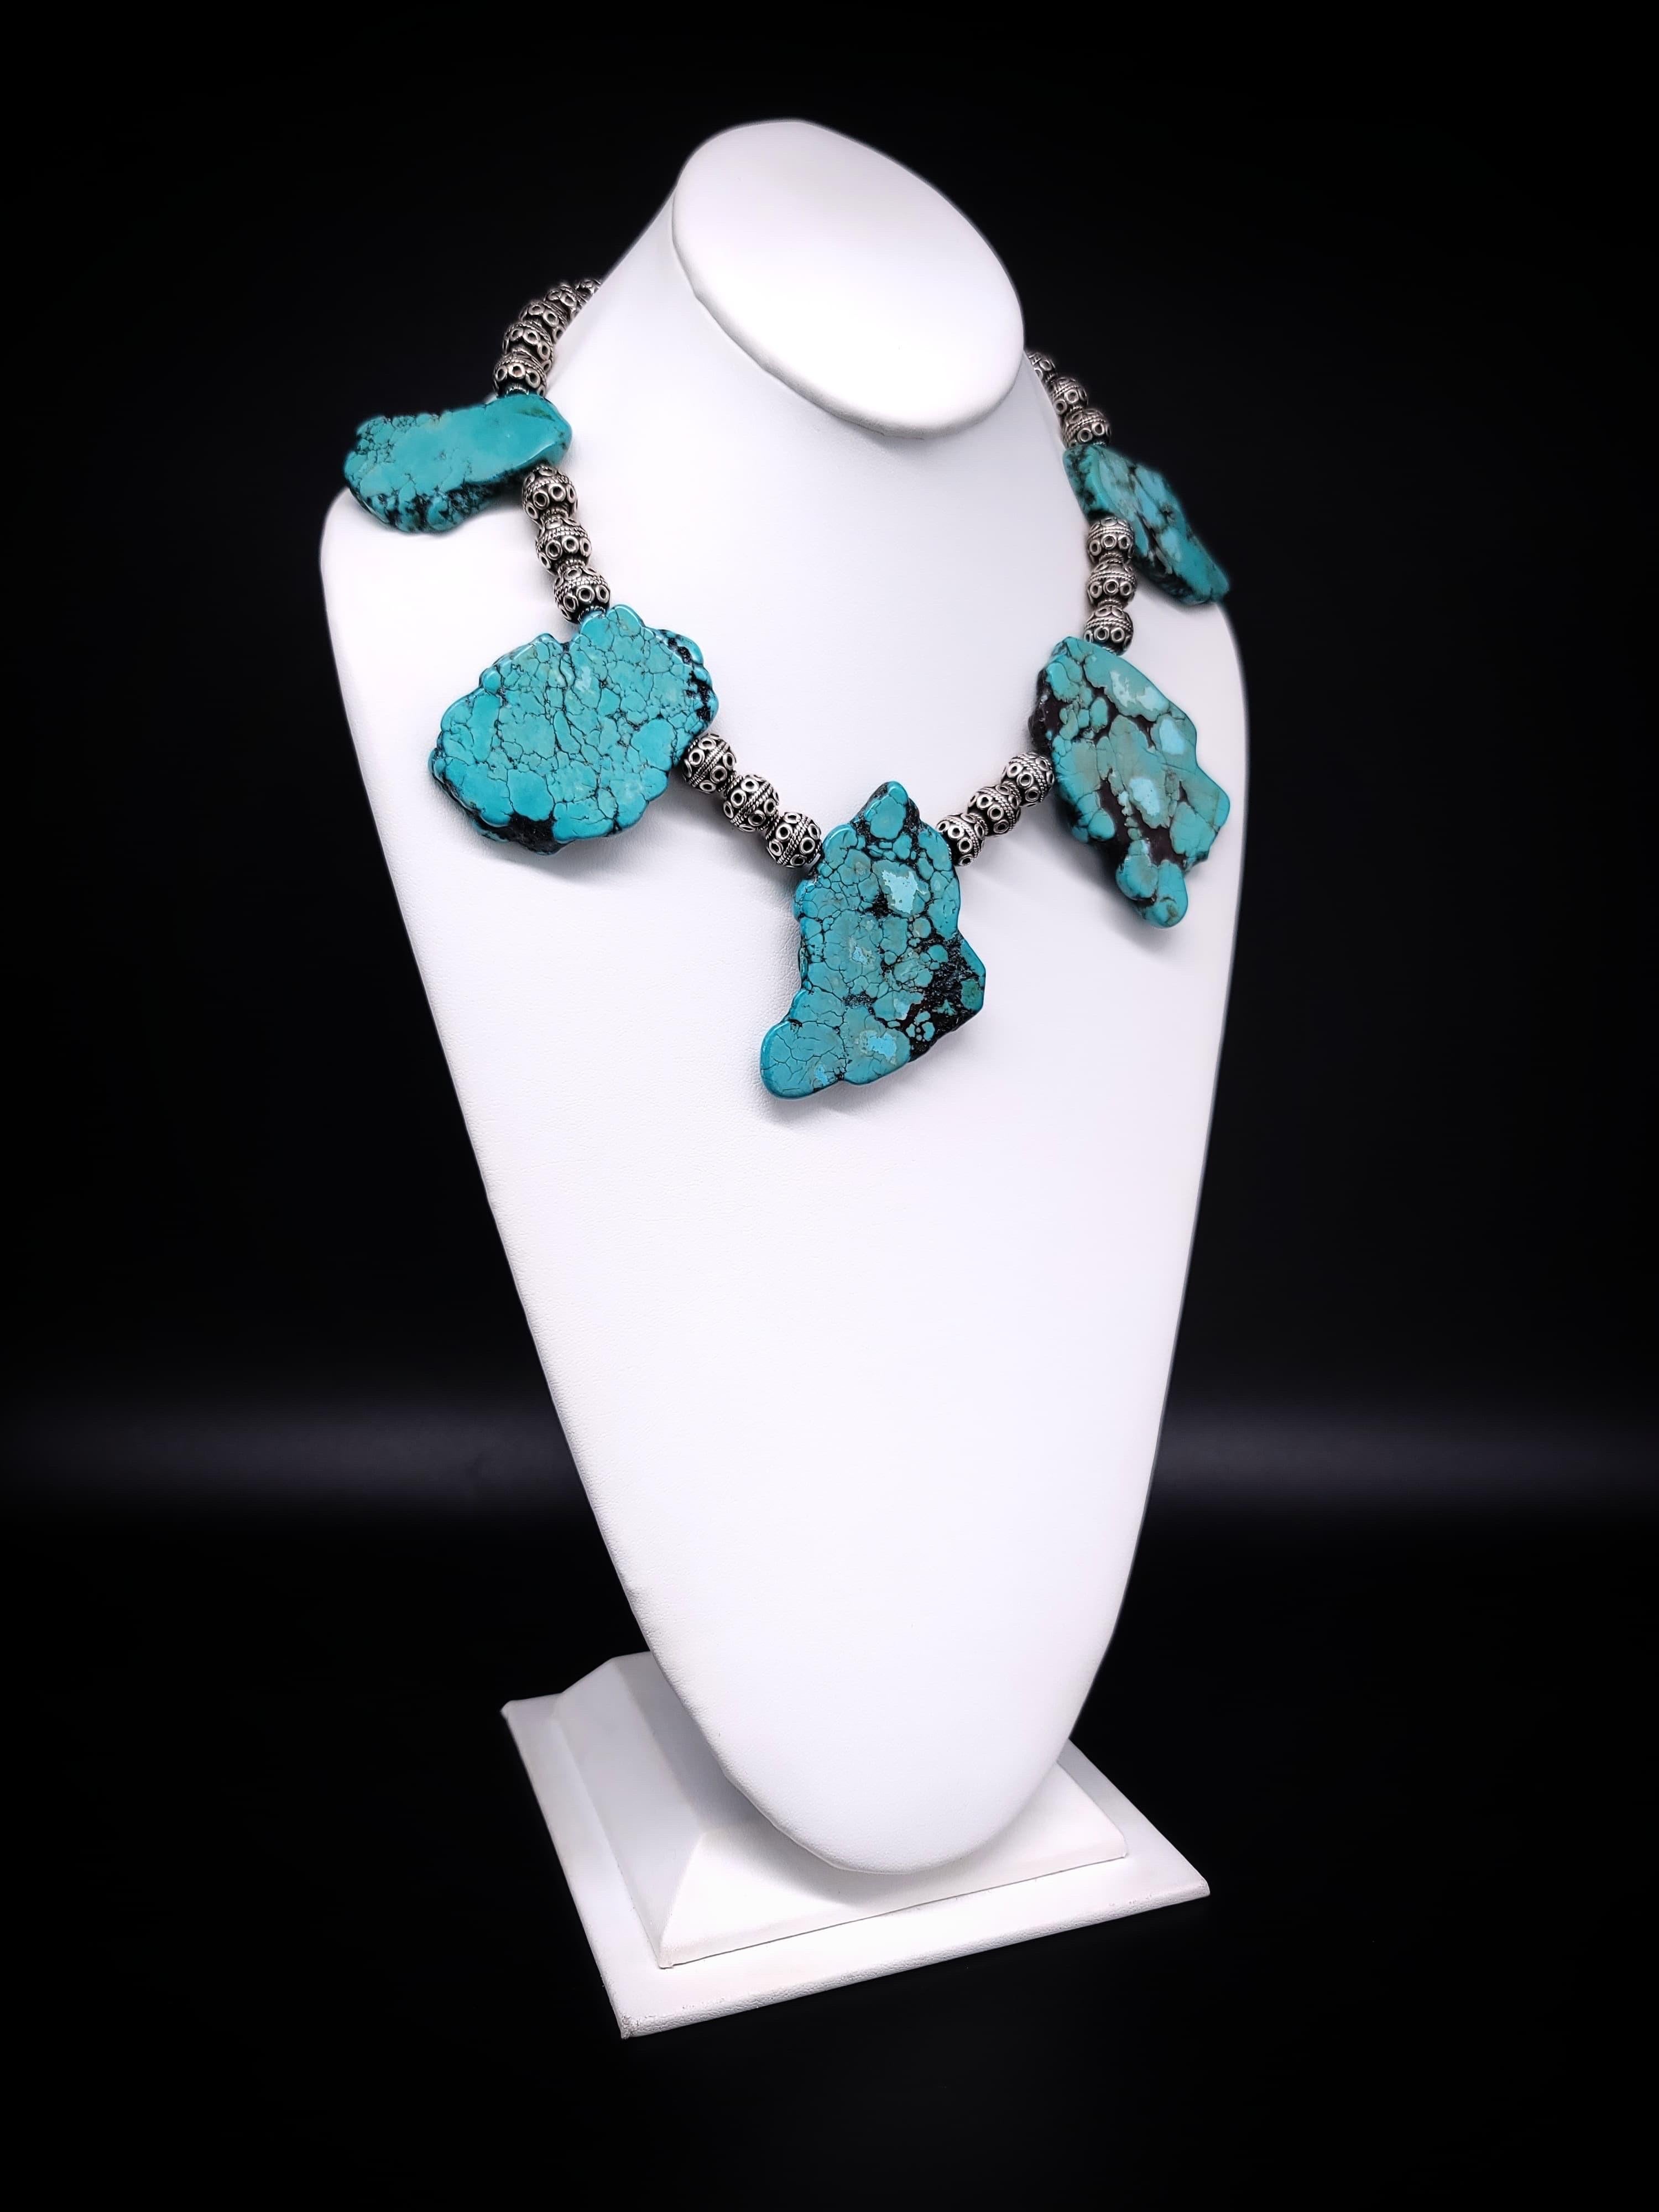 One-of-a-Kind.

Introducing the bold and massive hunks of Turquoise necklace, a true statement piece that embodies strength and elegance. The sheer weight and size of the Turquoise stones, coupled with the sturdy Sterling Silver beads from Bali,